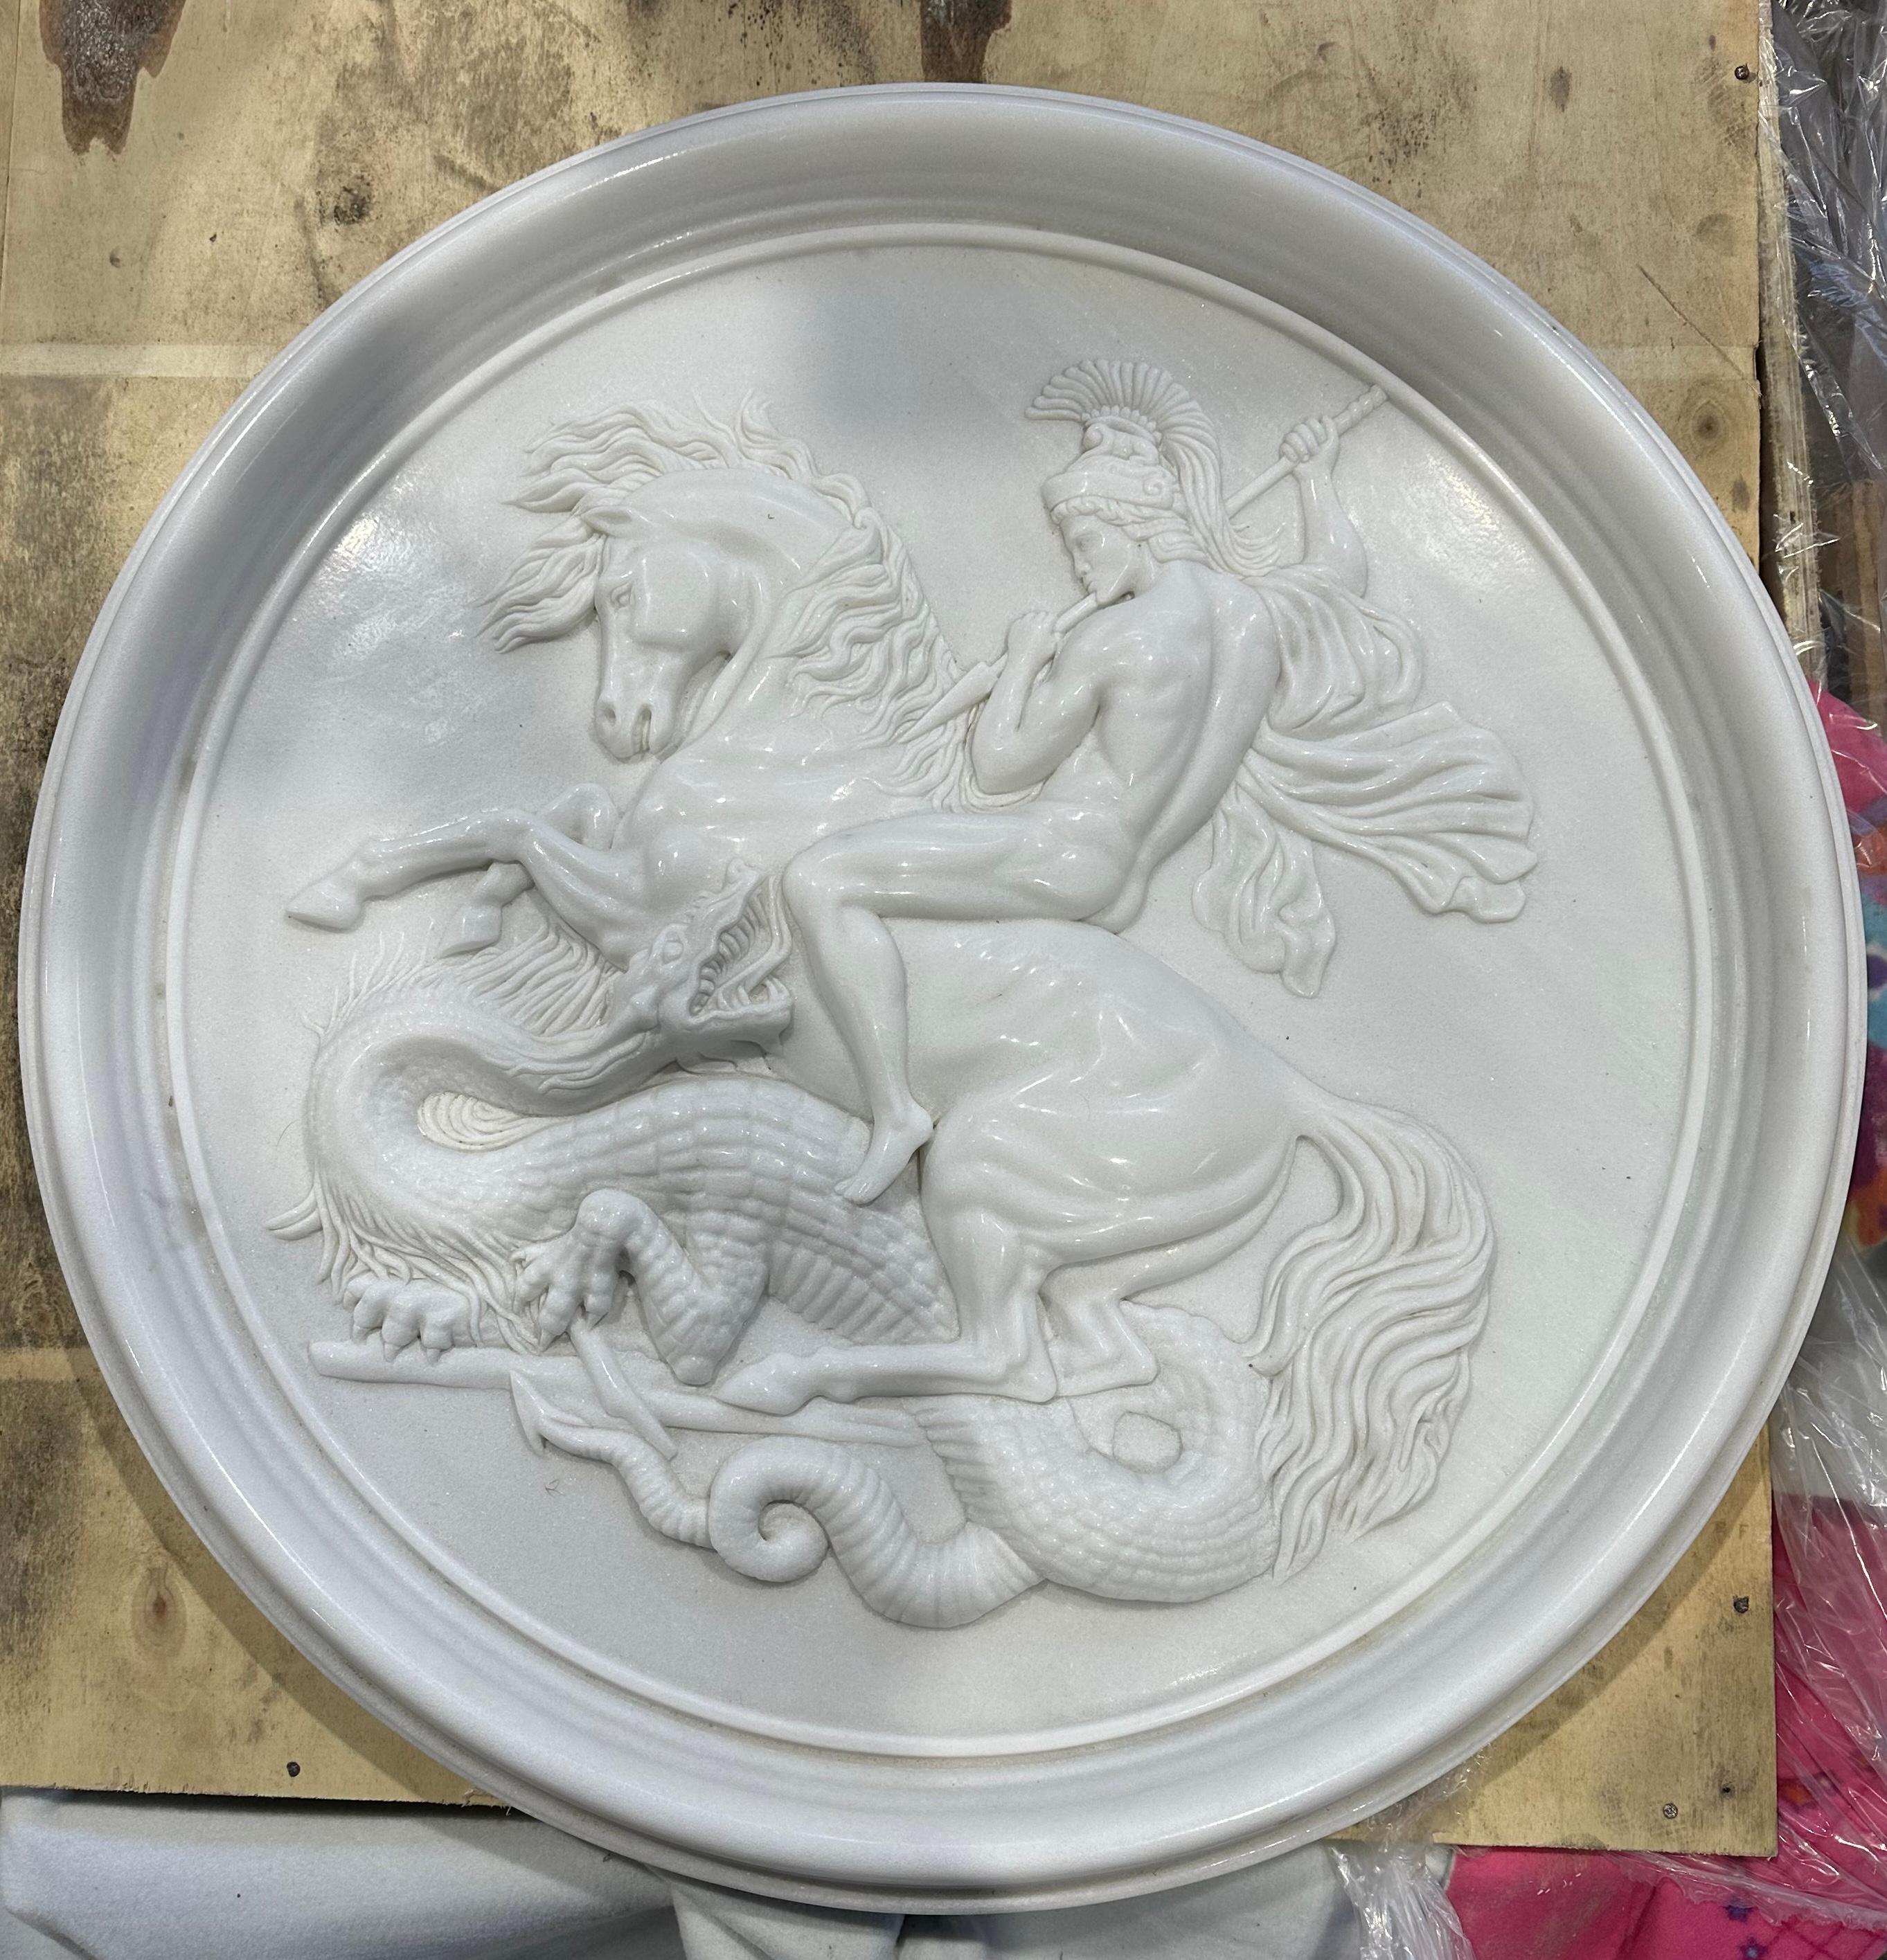 A highly decorative and skilfully crafted round white marble relief depicting Hercules and the serpent like dragon Ladon. Hercules was the son of Zeus in Greek Mythology. Ladon guarded the golden apples in the Garden of Hesperides. In pursuing his